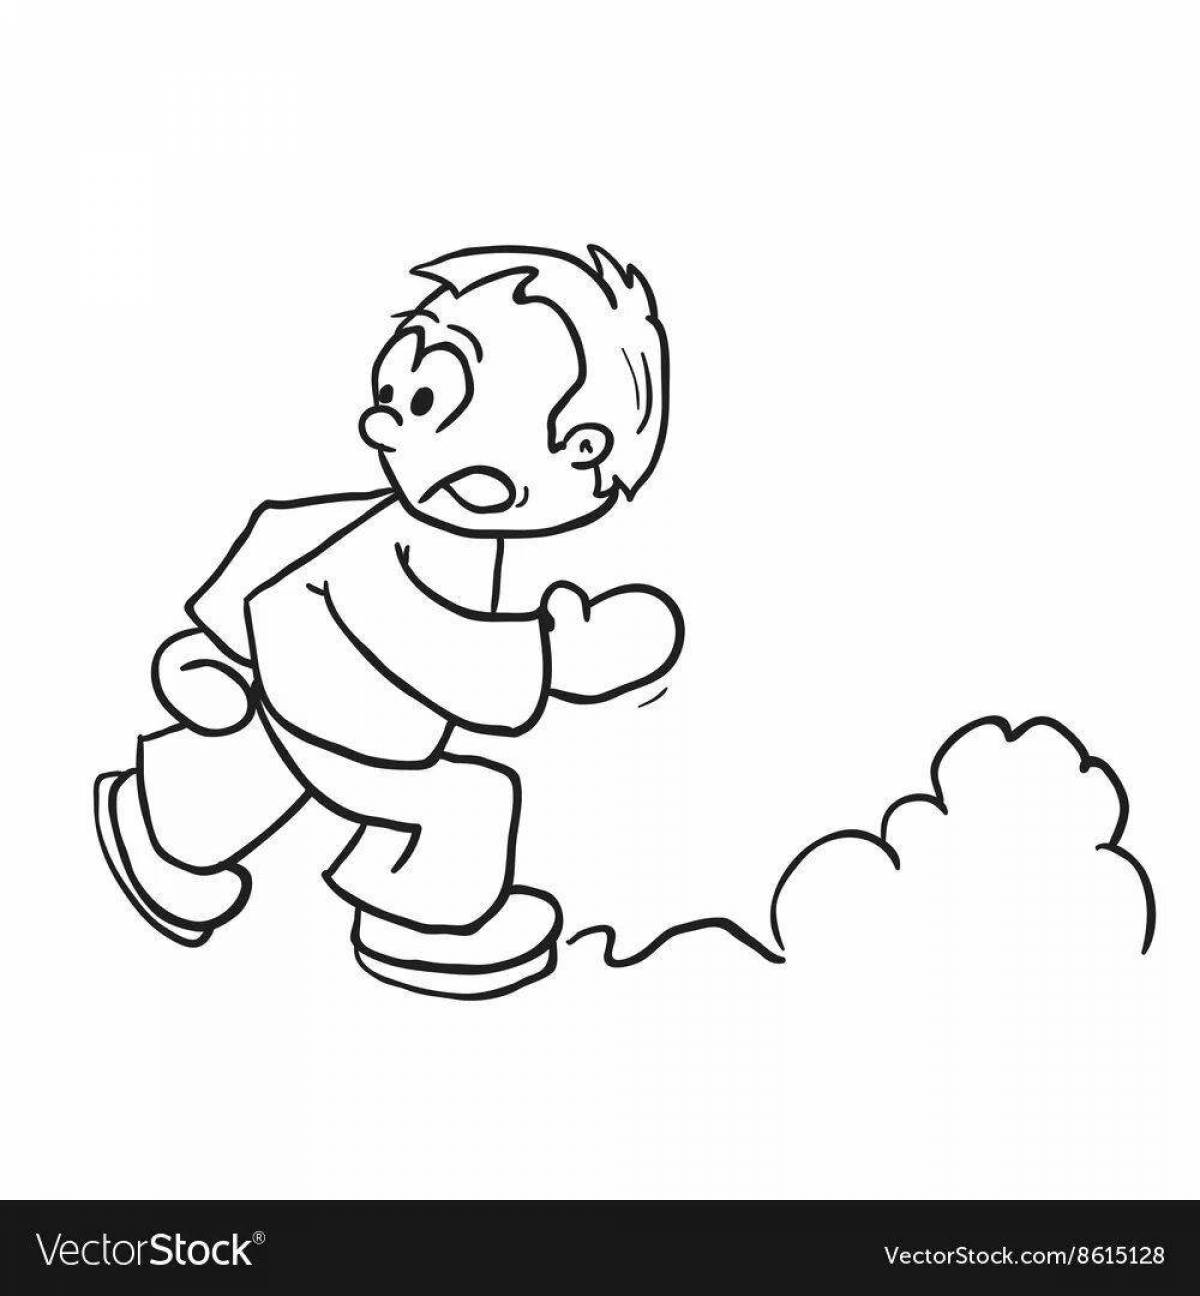 Coloring page bright boy running